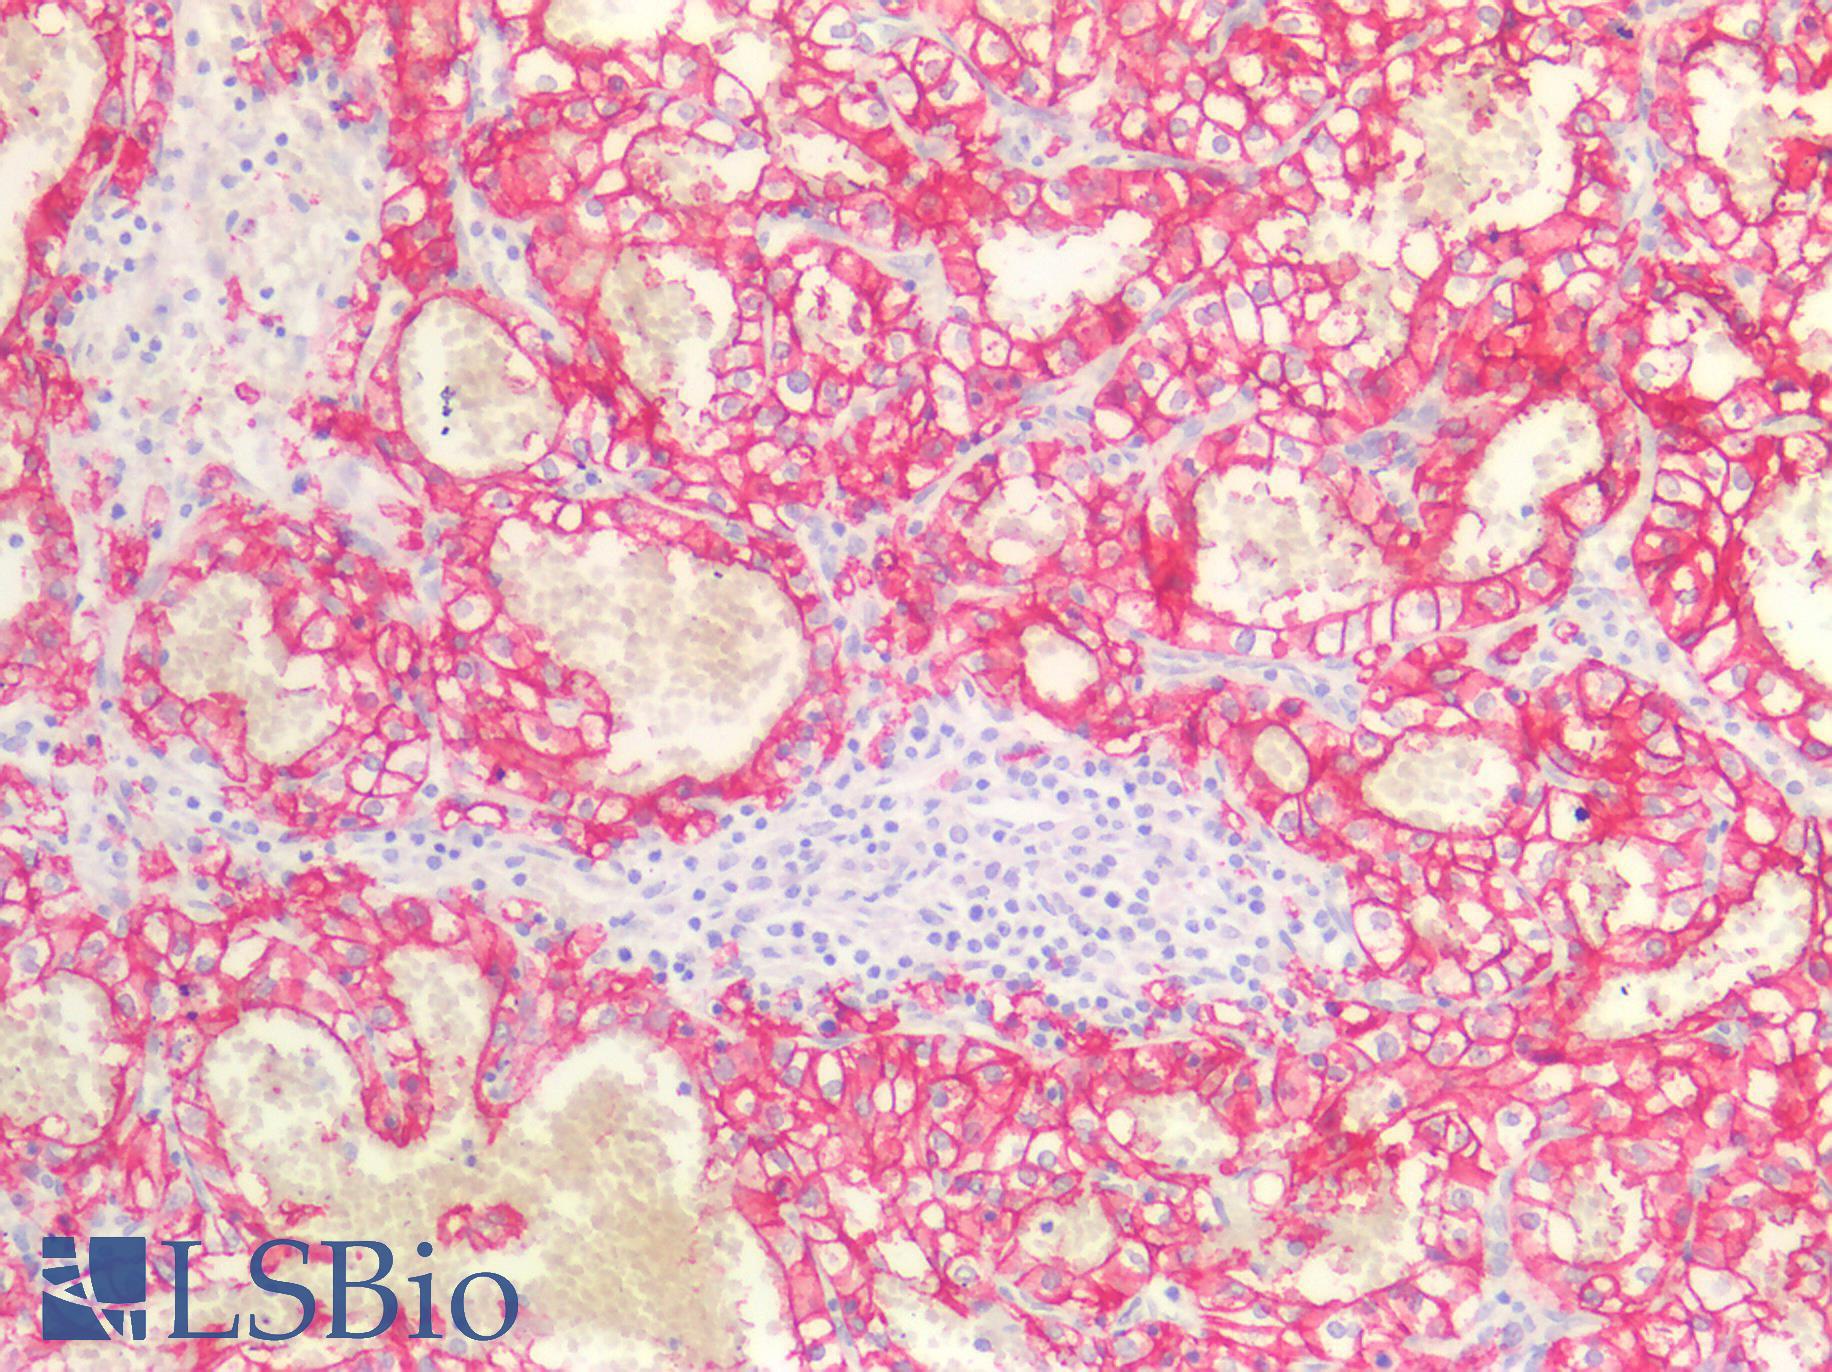 CA9 / Carbonic Anhydrase IX Antibody - Human Kidney Renal Cell Carcinoma: Formalin-Fixed, Paraffin-Embedded (FFPE)